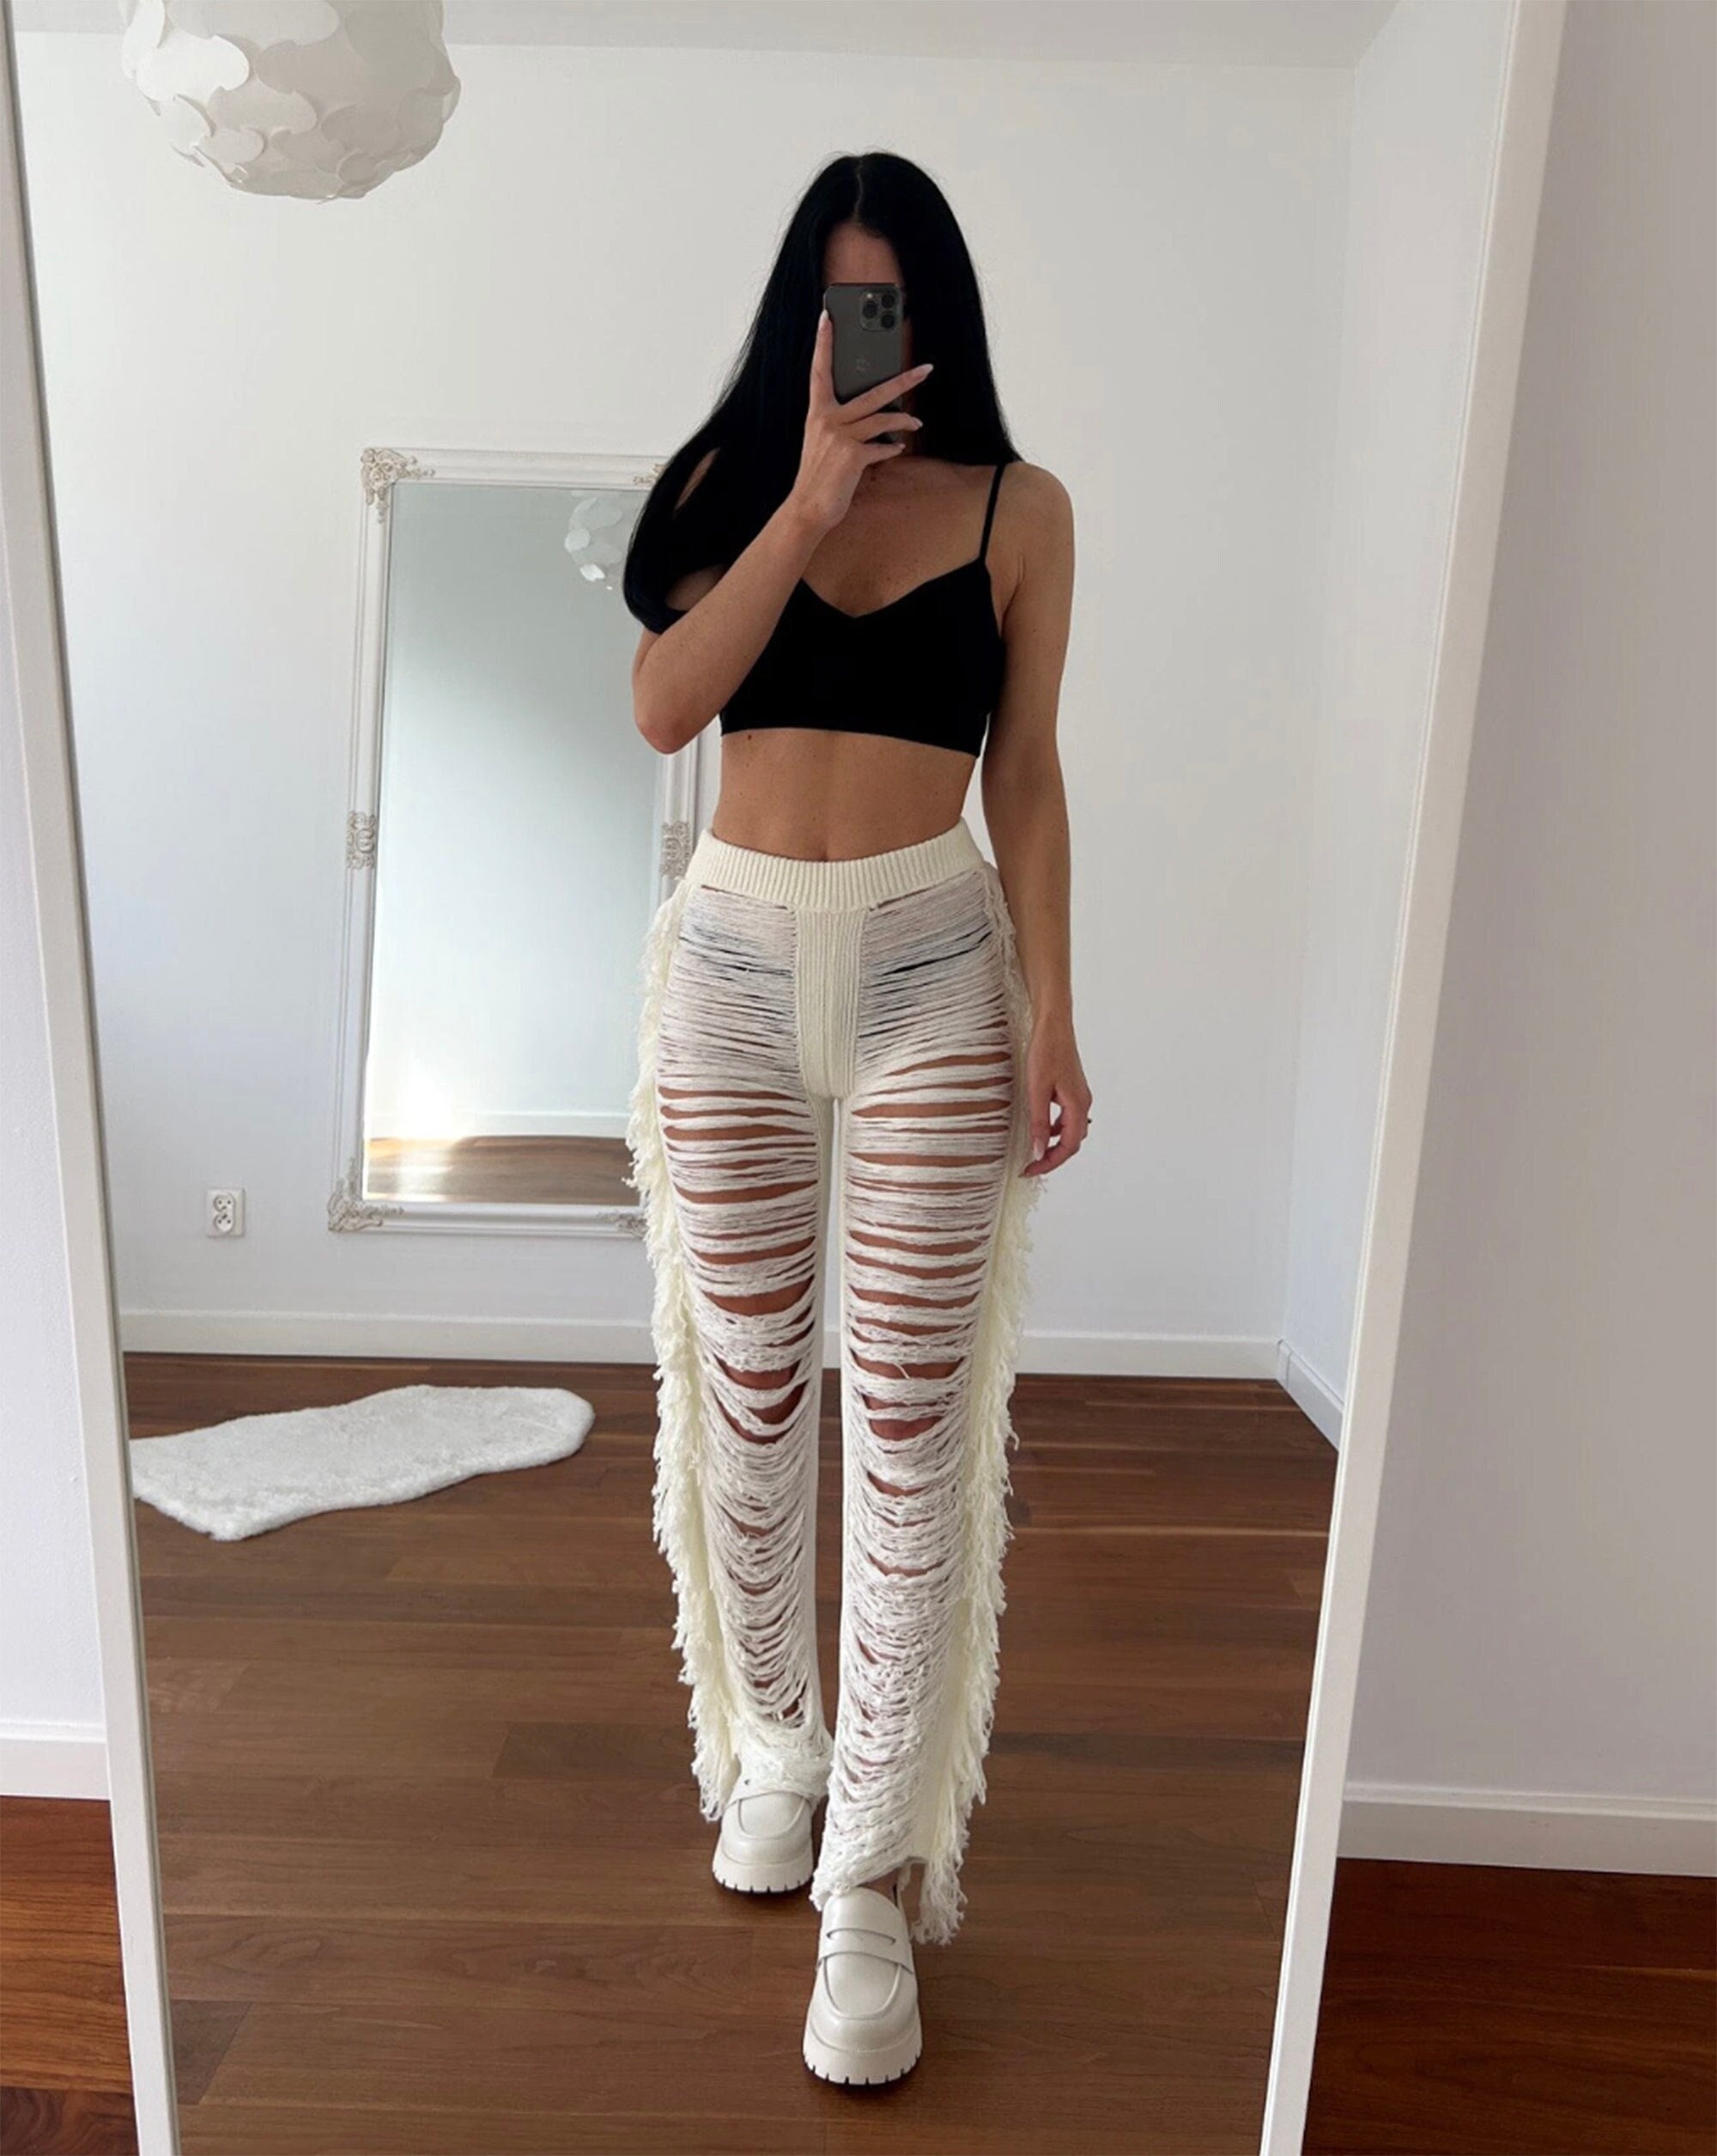 High Waist Ripped Jeans -  Canada